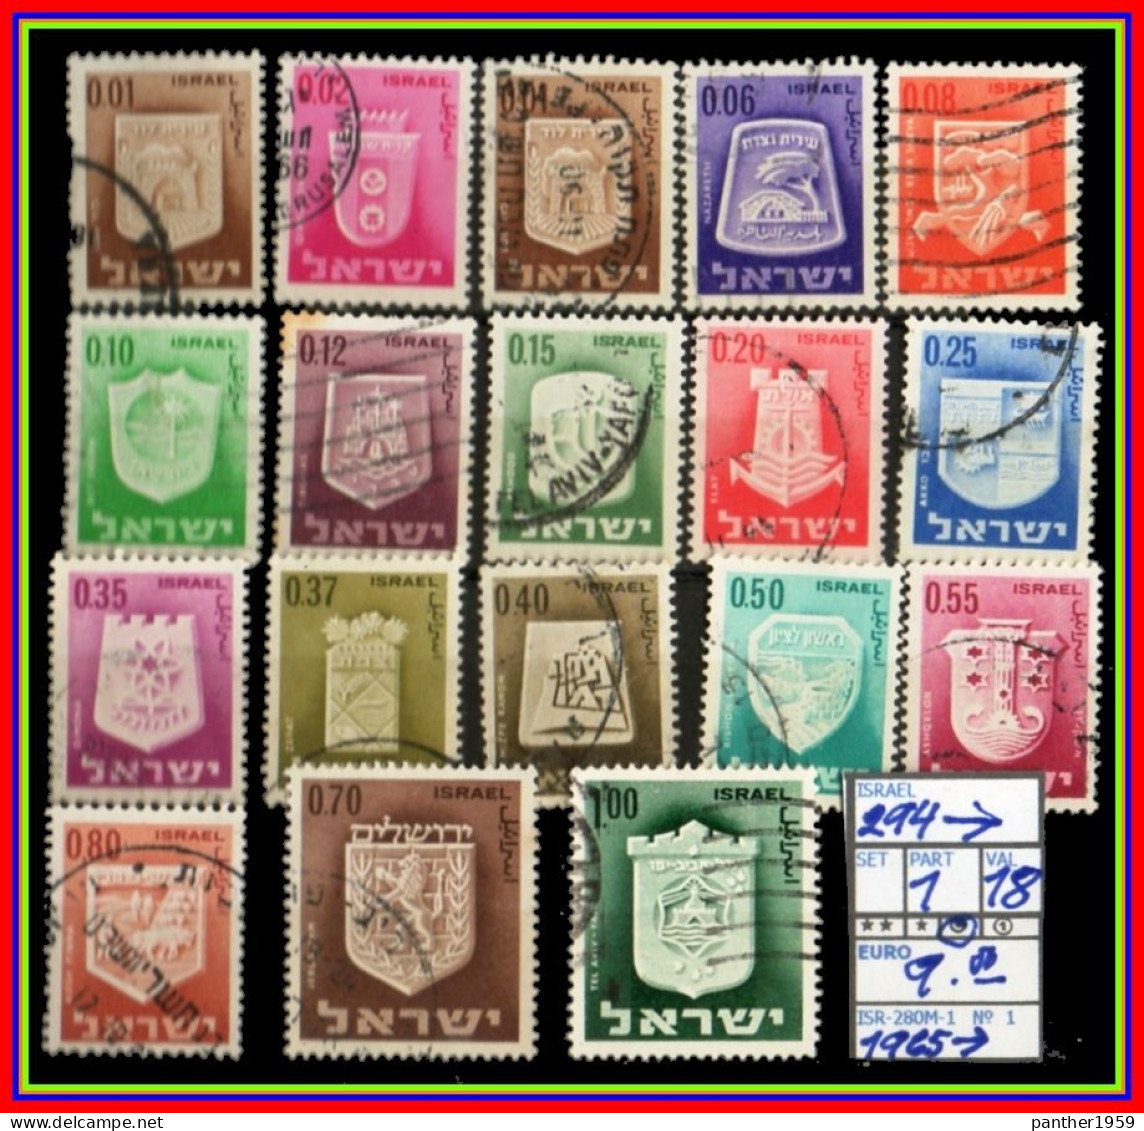 ASIA# ISRAEL# REPUBLIC#DEFINITVES#PARTIAL SET# USED# (ISR-280M-1) (01) - Used Stamps (without Tabs)